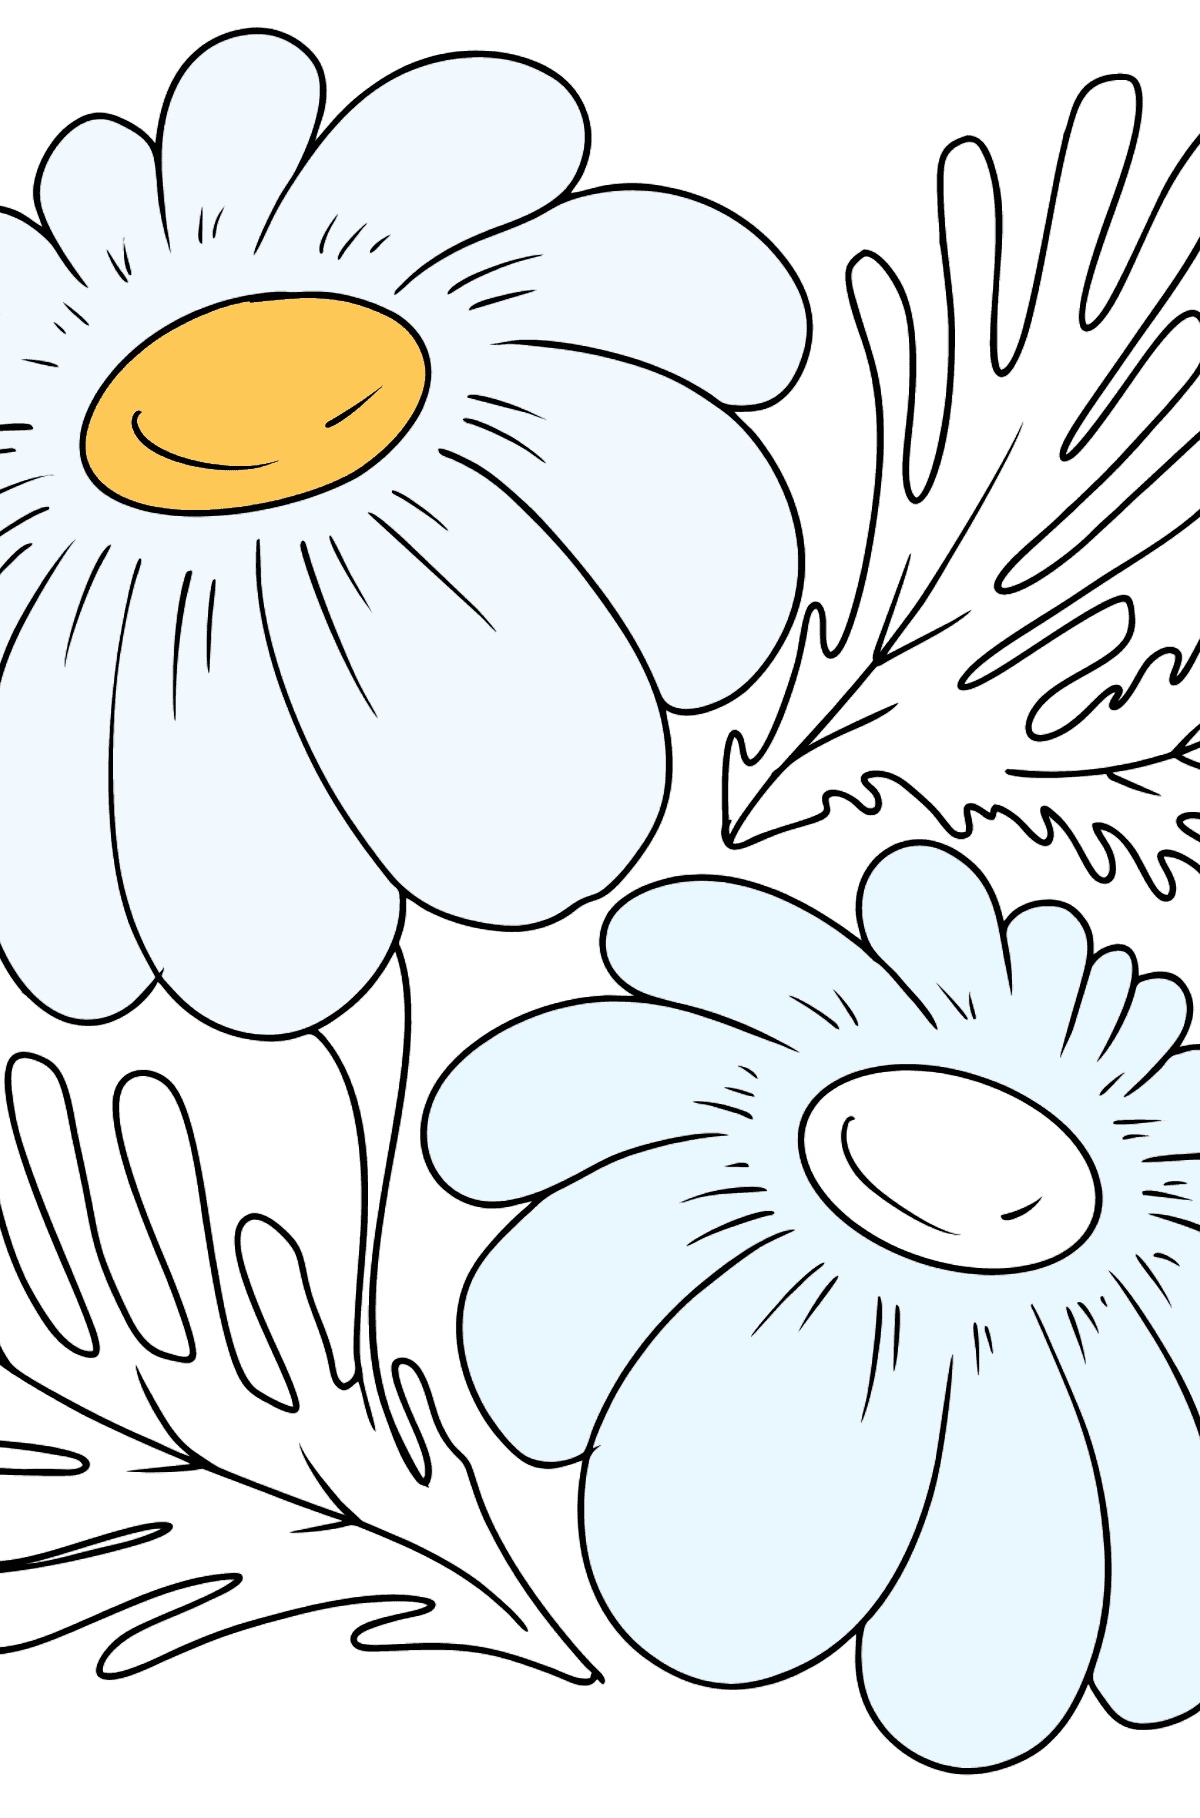 Coloring Page - Chamomile flowers - Coloring Pages for Kids